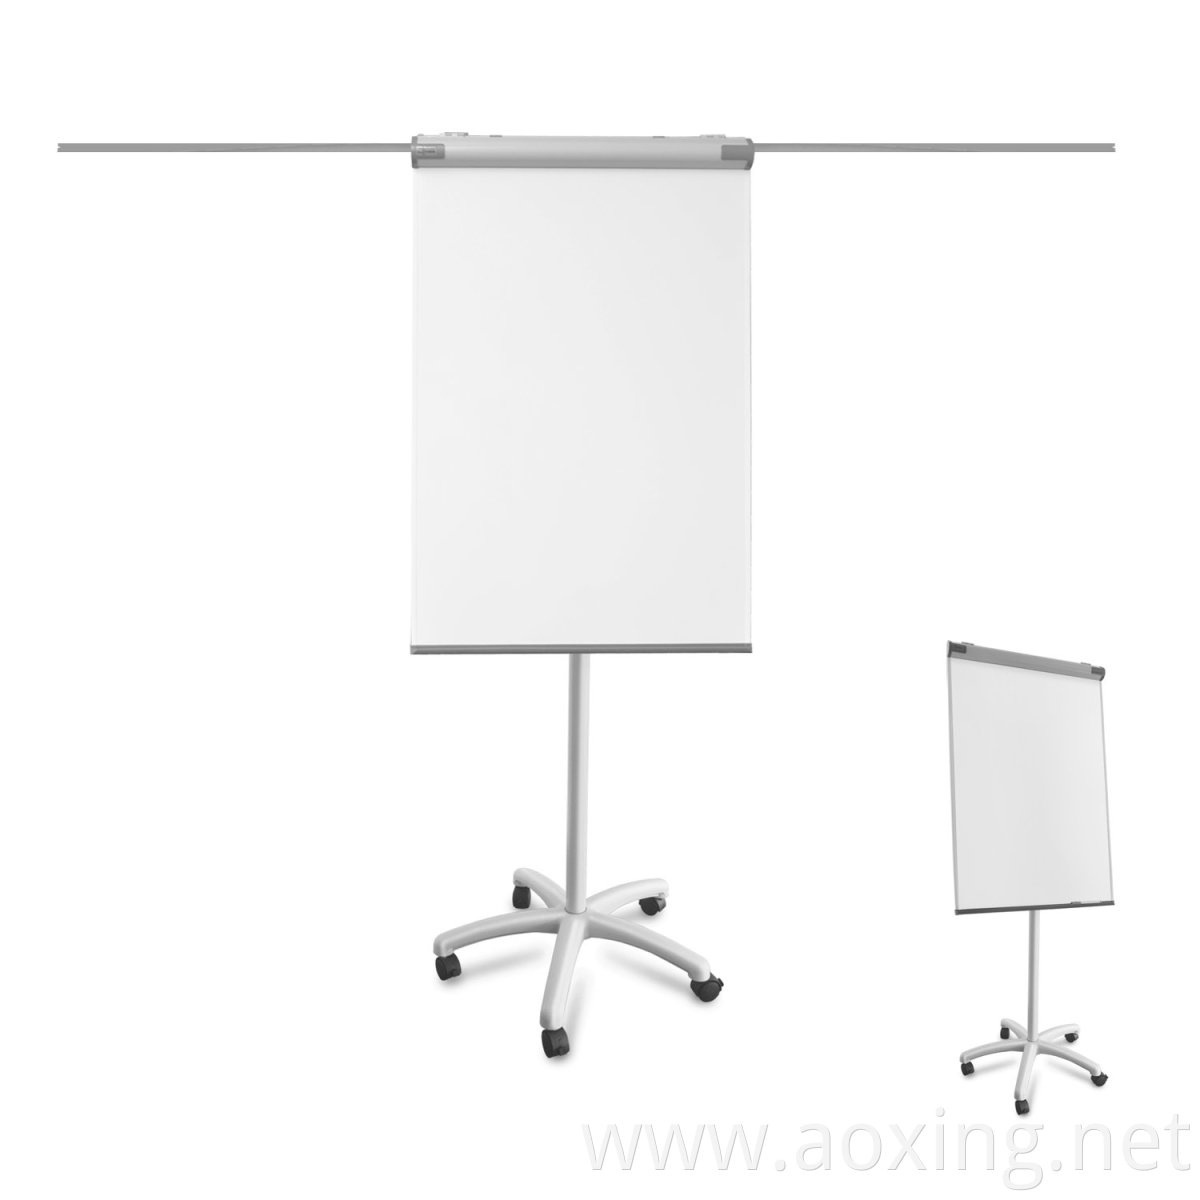 Flipchart Professional with Casters Frame with | Mobile and Versatile Folding Paper Holder Adjustable with Magnetic whiteboard